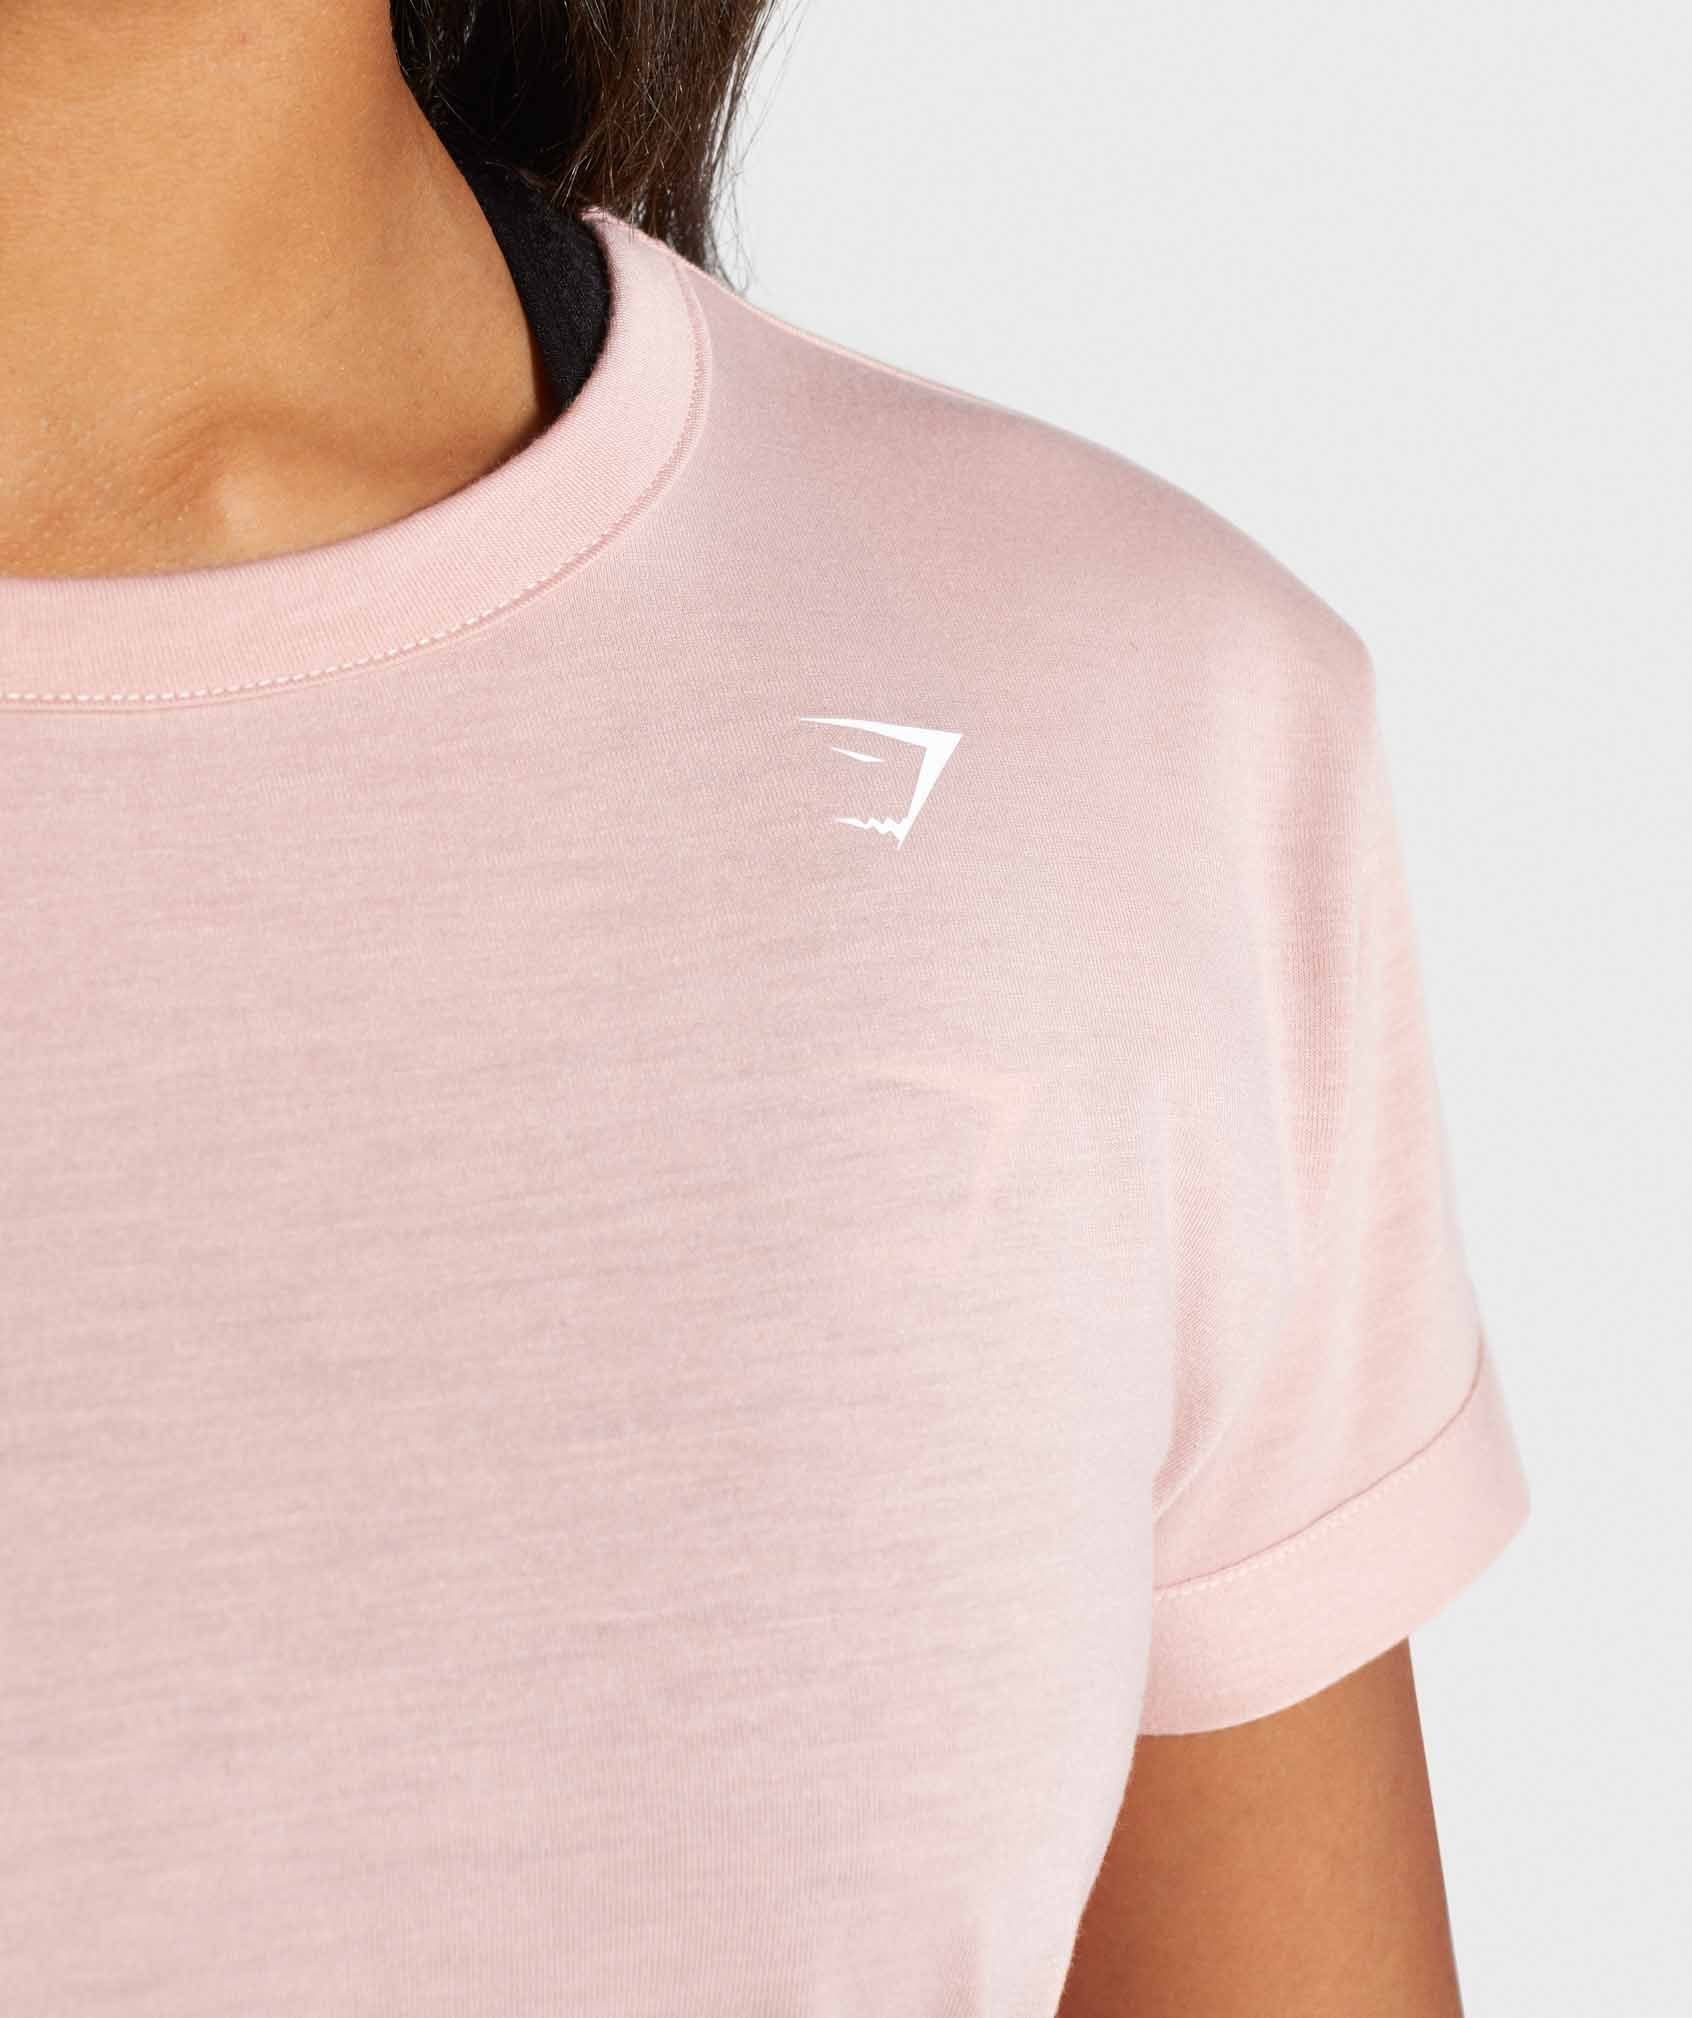 Essential Tee in Pink - view 5